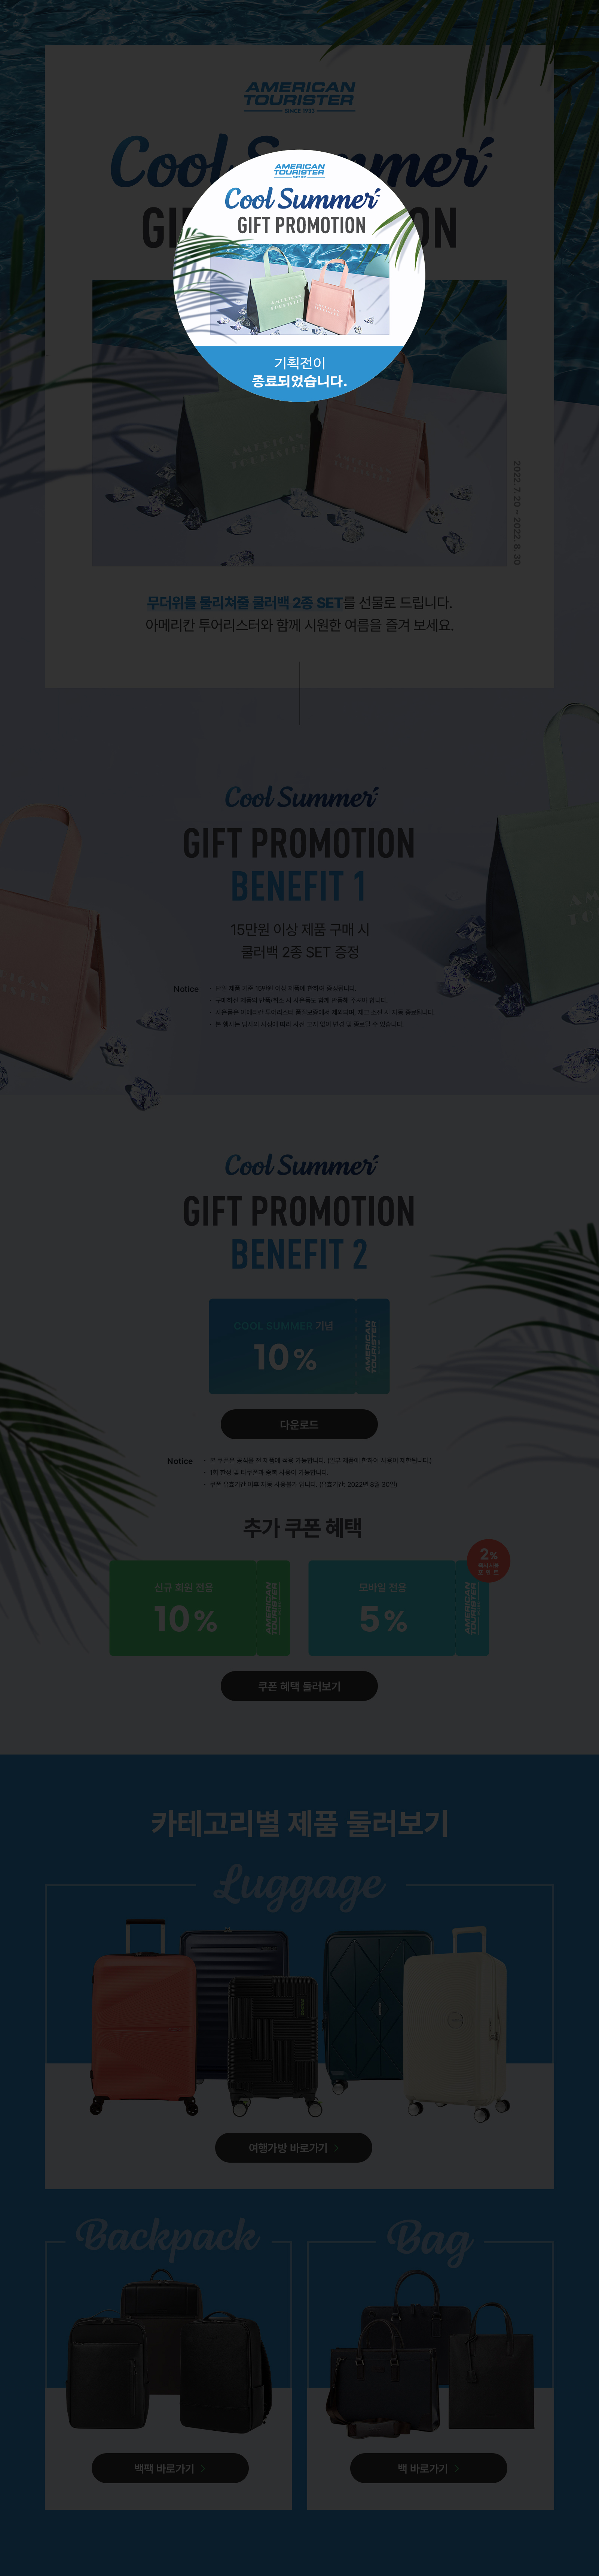 Cool Summer's gift promotion 기획전이 종료되었습니다.